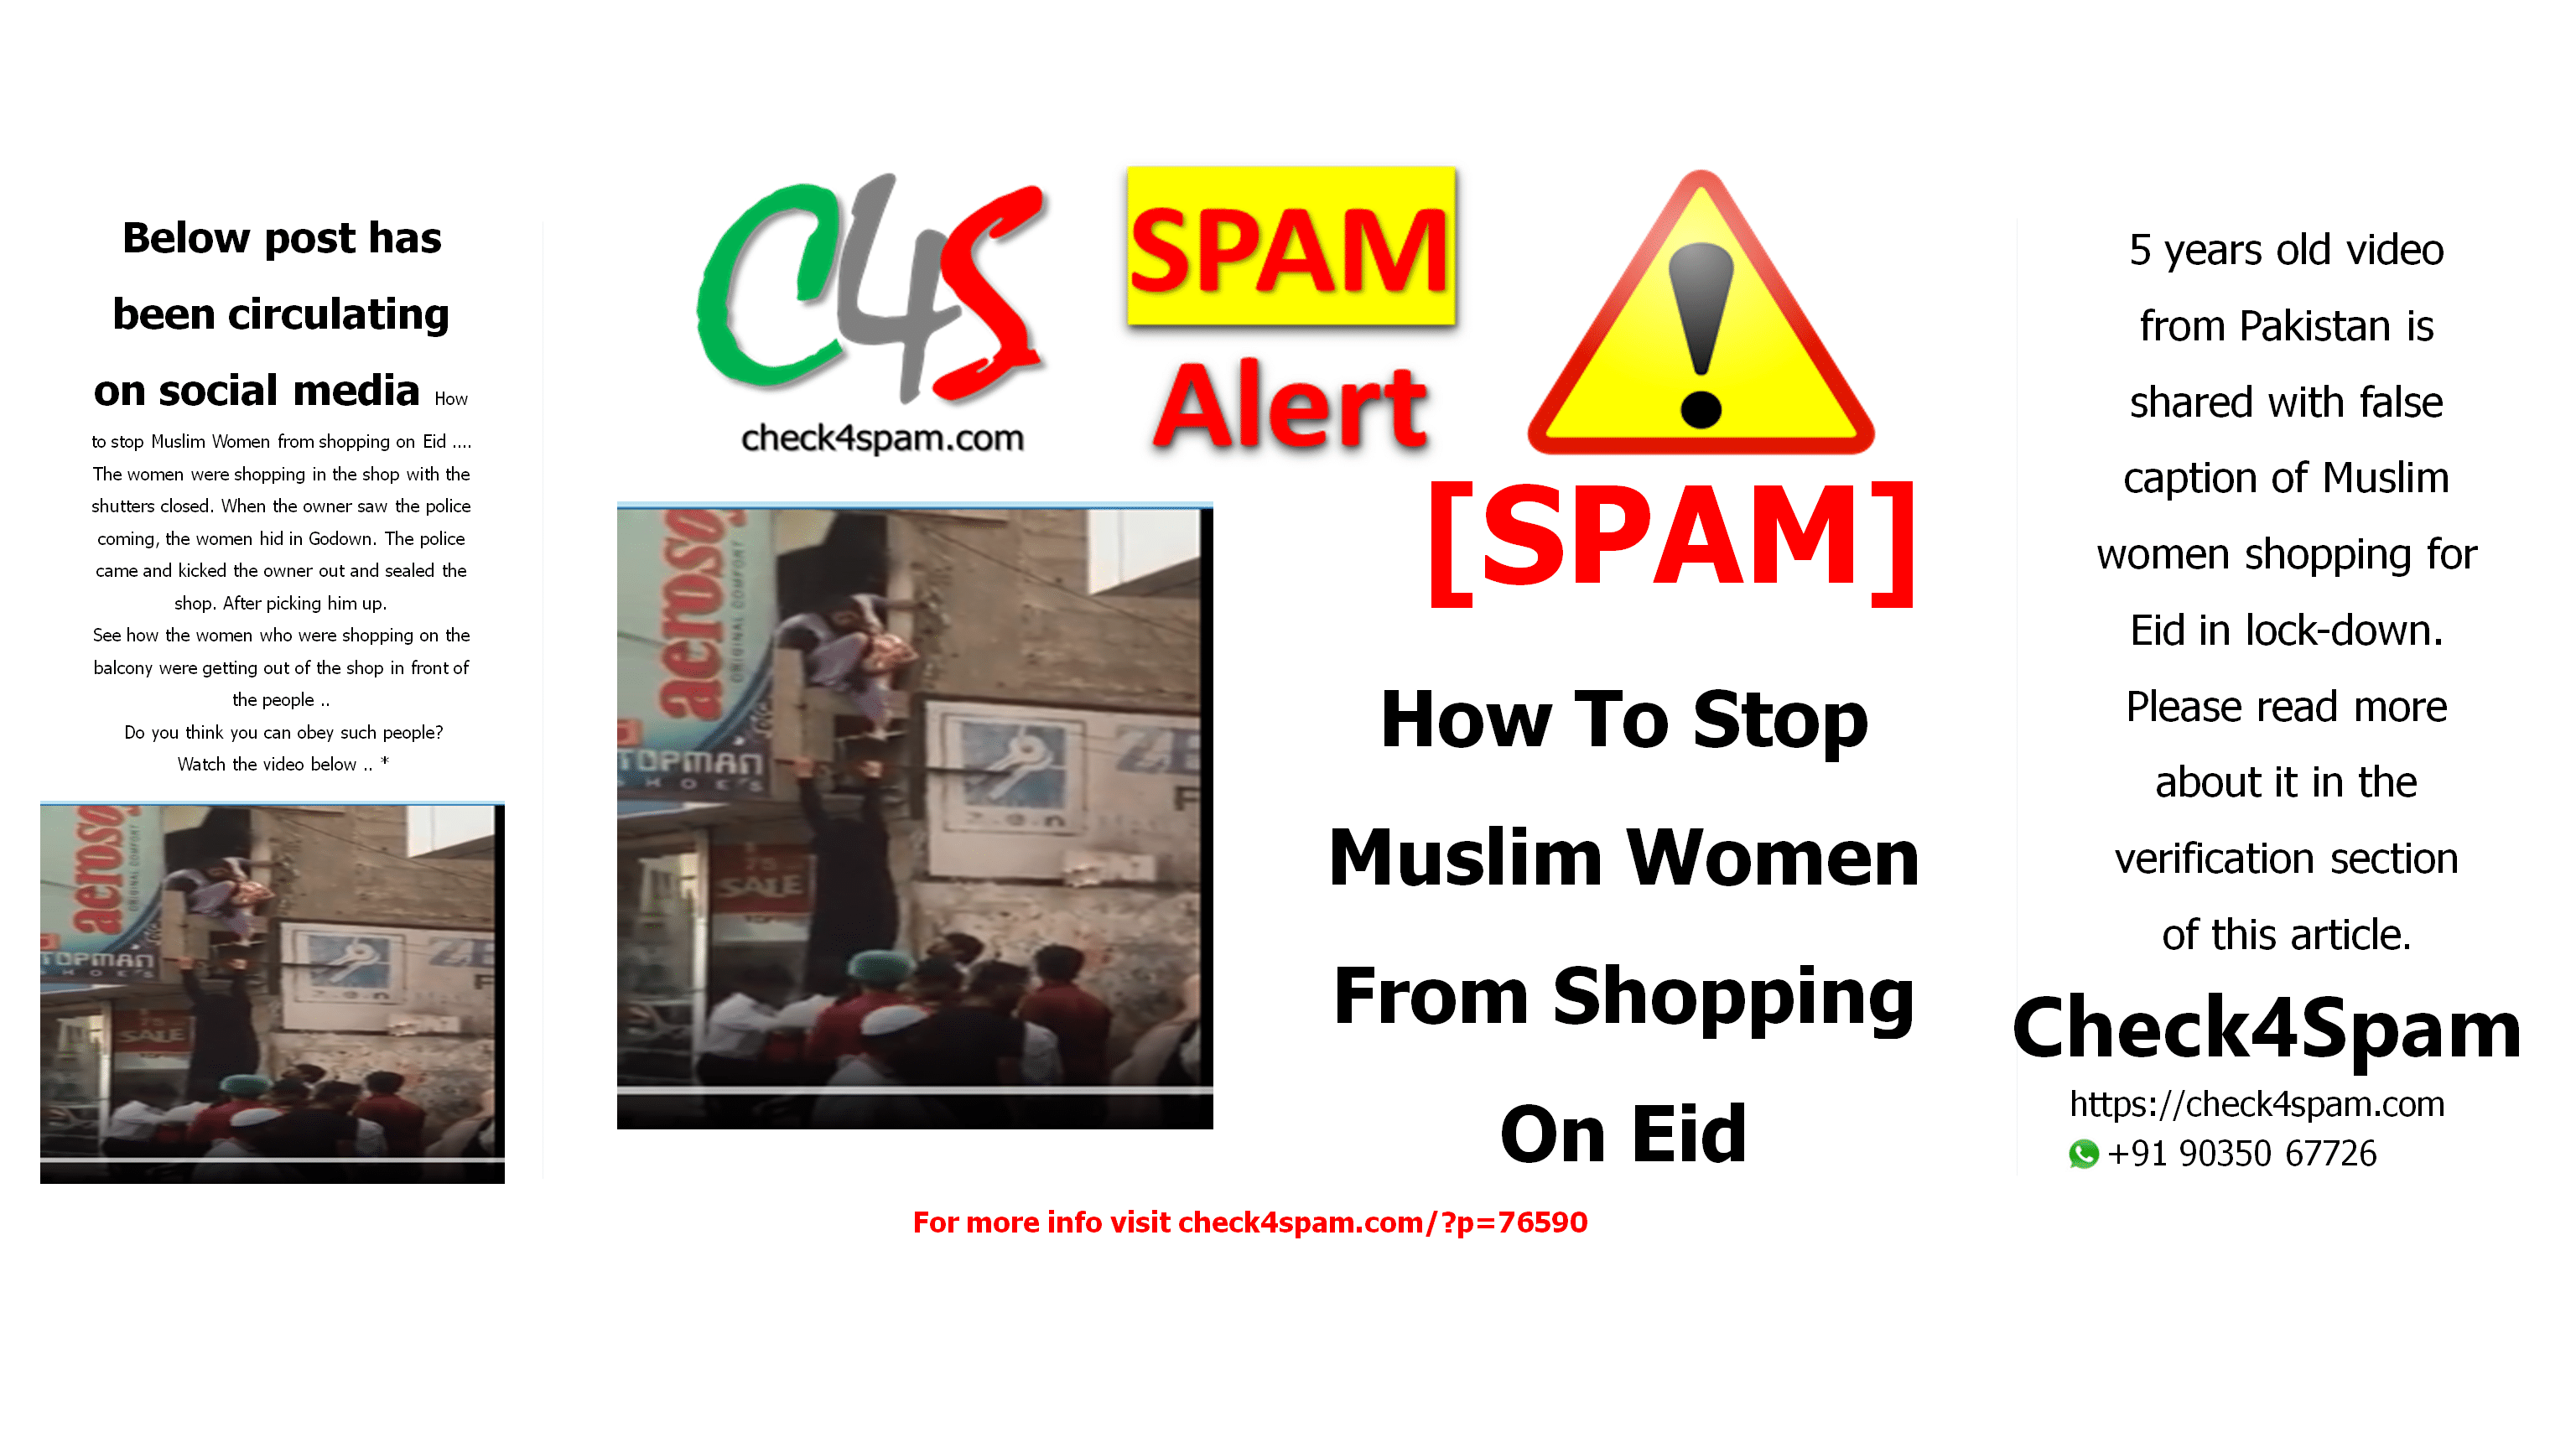 How To Stop Muslim Women From Shopping On Eid